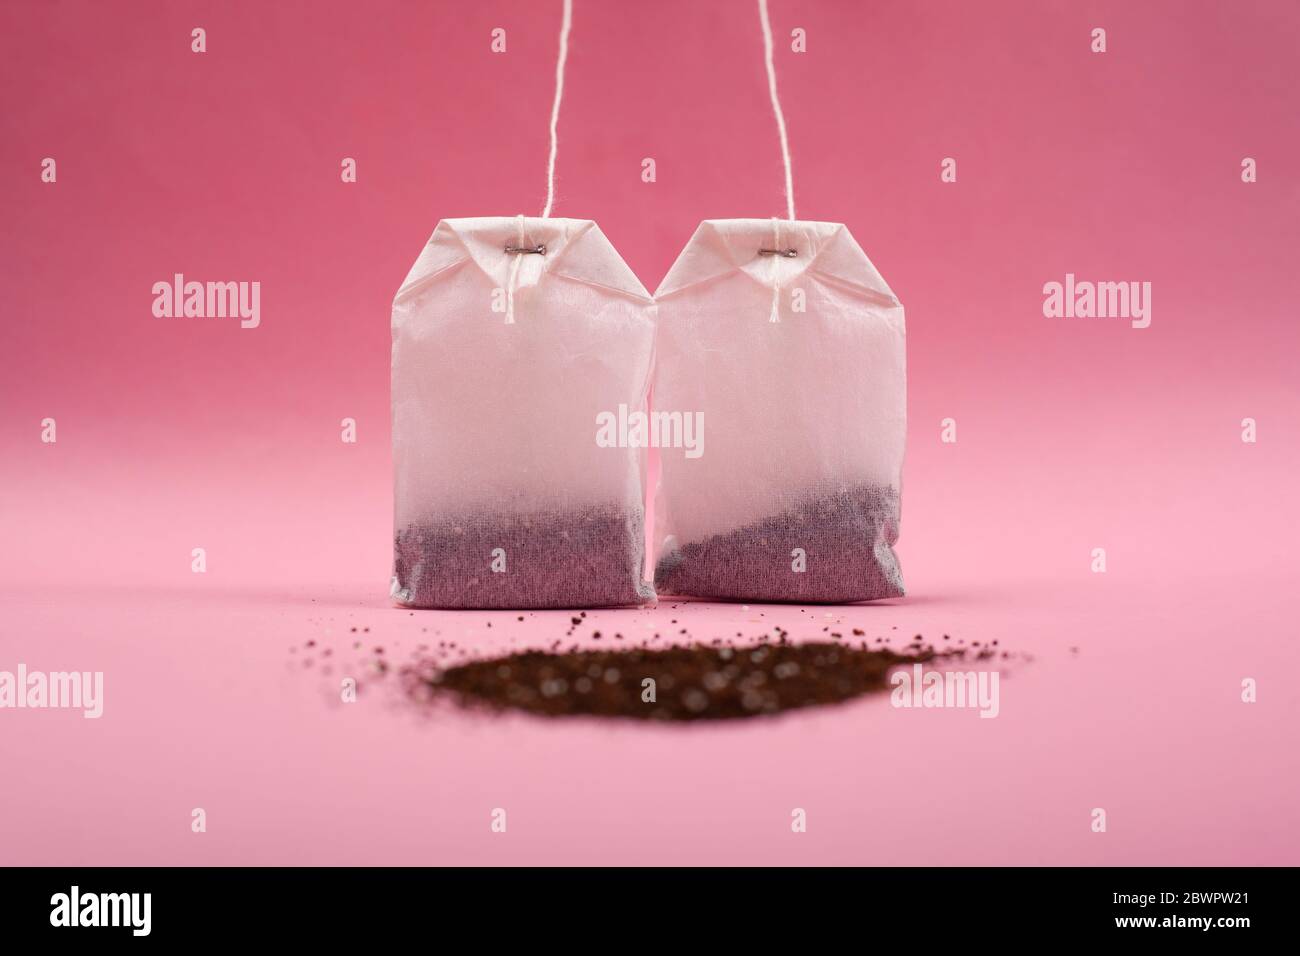 two paper bags with tea and with a bunch of black loose tea on a pink background close-up. Stock Photo